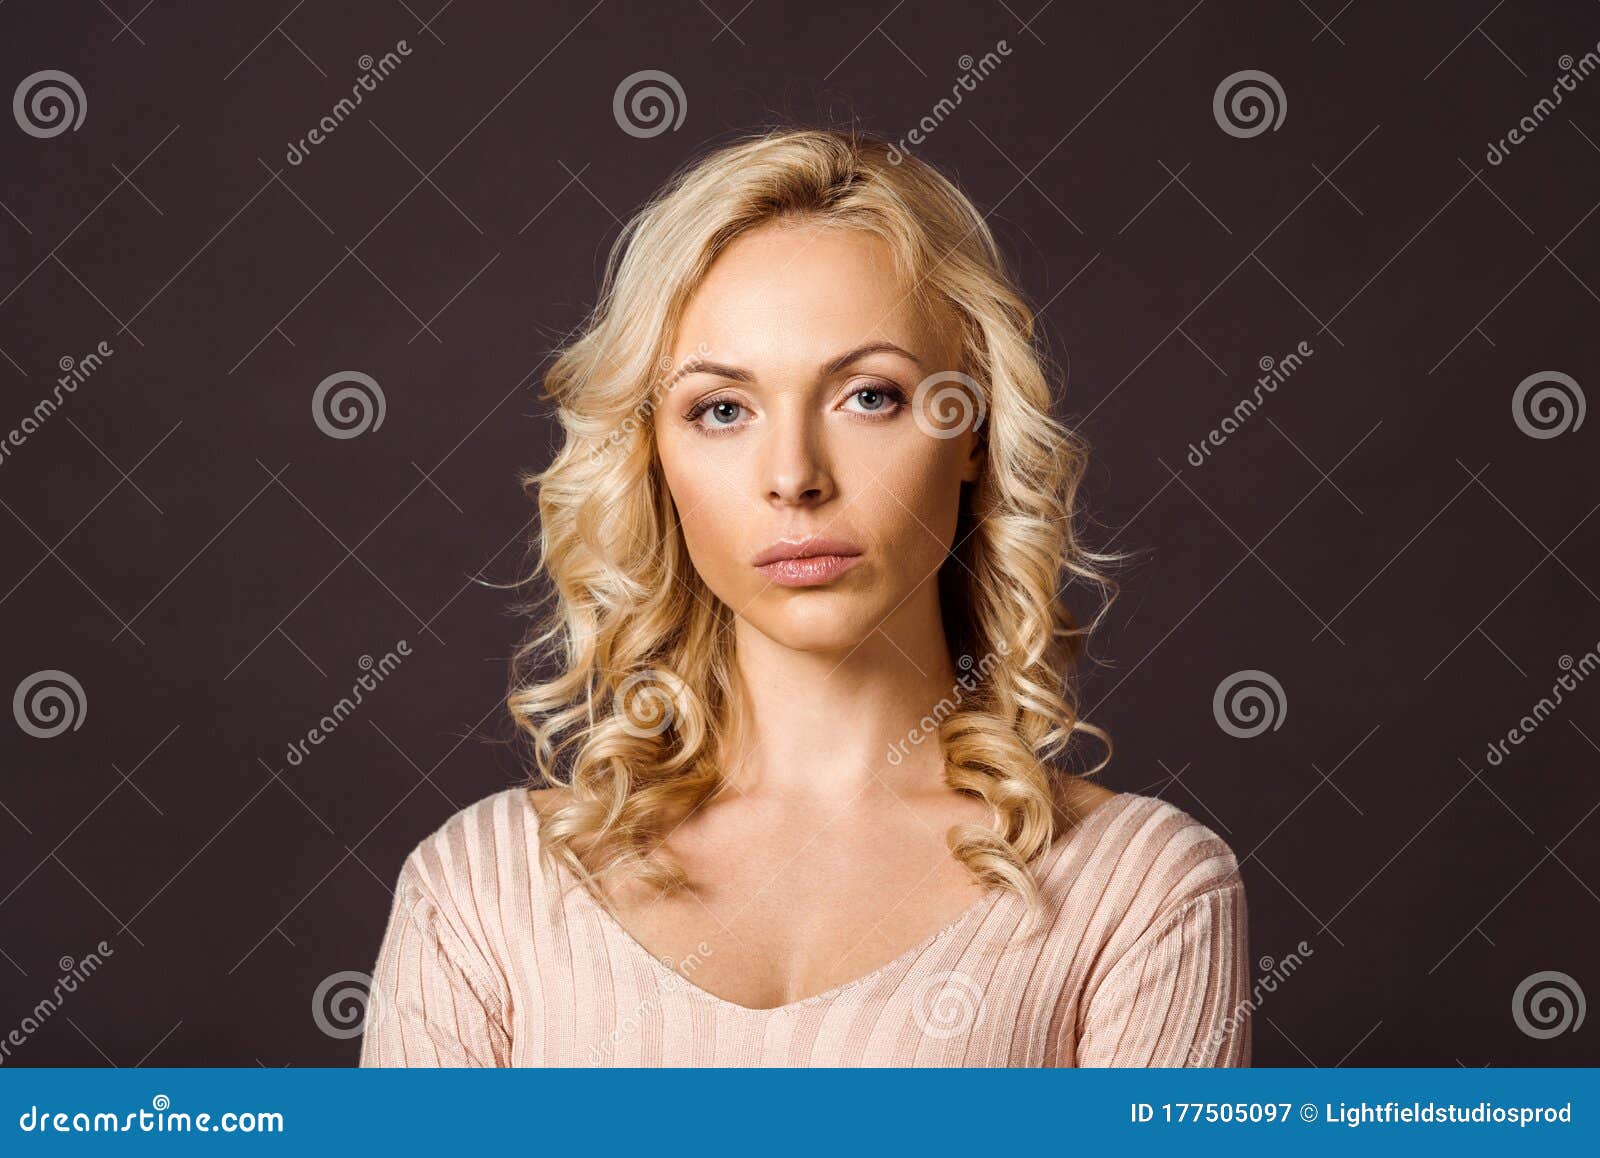 Serious Blonde Woman with Hair in Bun - wide 2